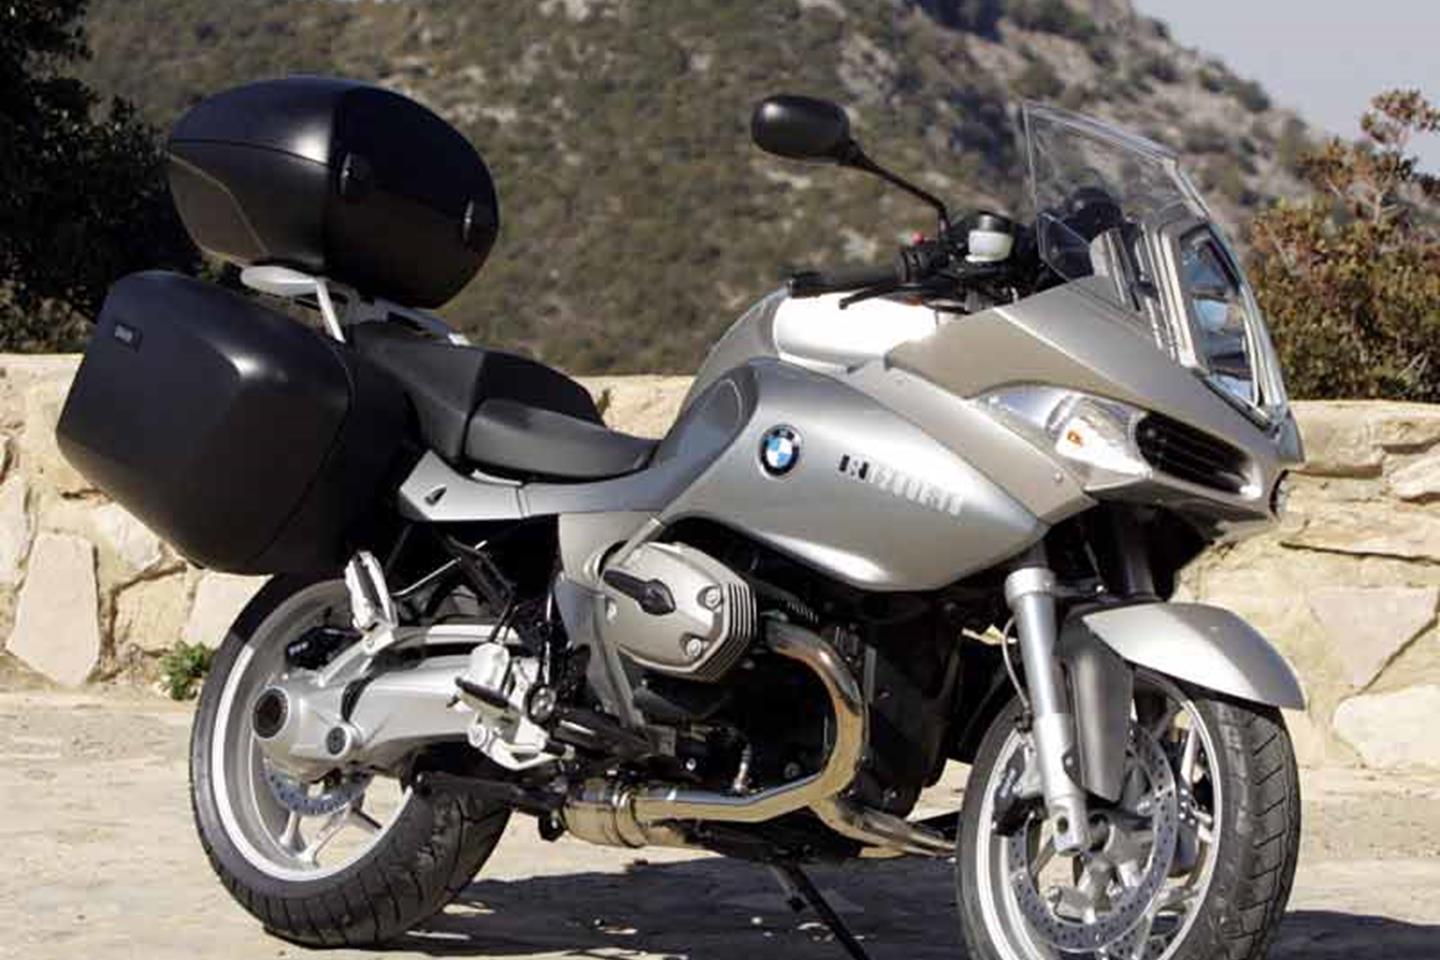 BMW R1200ST (2005-2007) Review | Speed, Specs & Prices